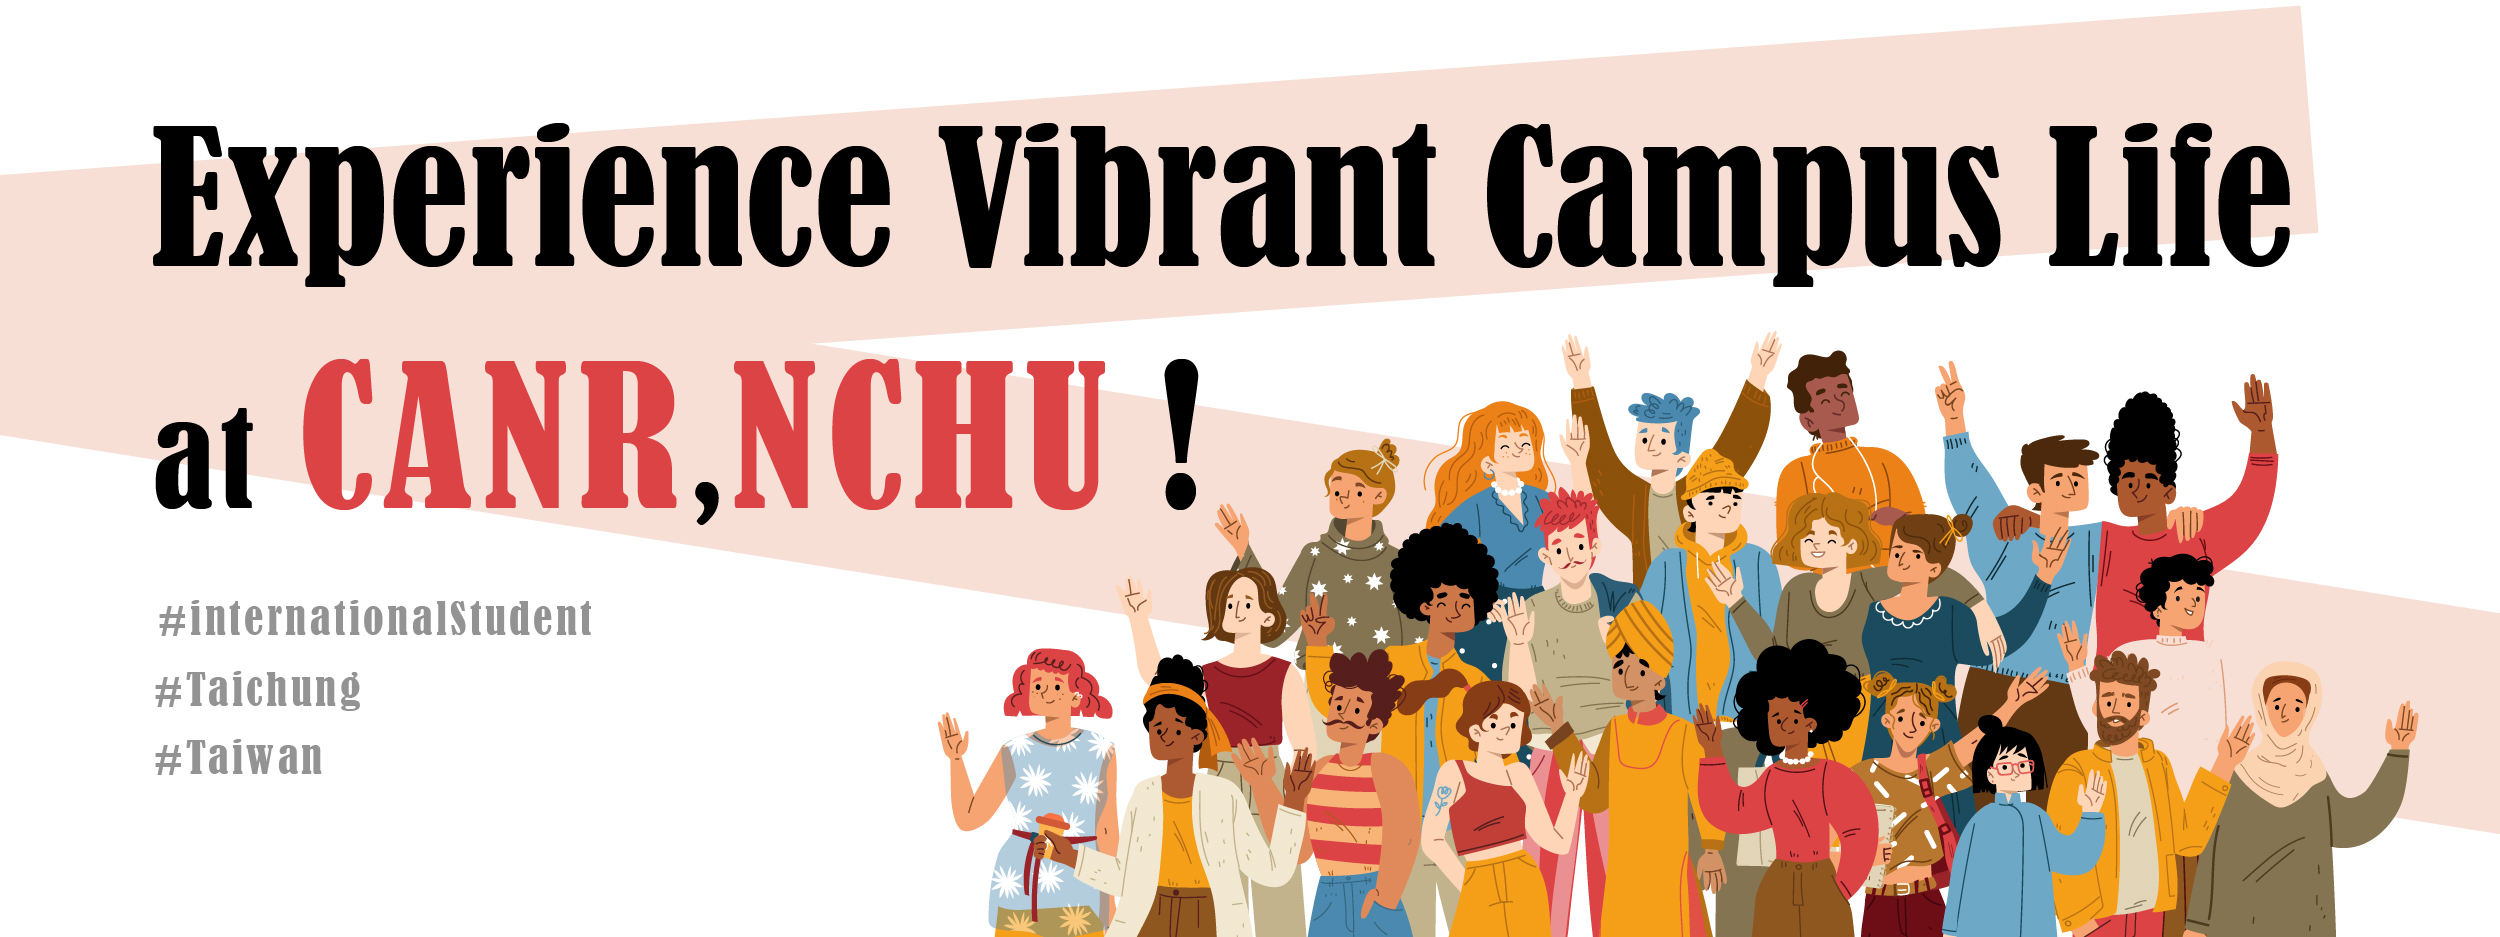 Experience Vibrant Campus Life at CANR,NCHU!Unlock Your Potential Abroad!